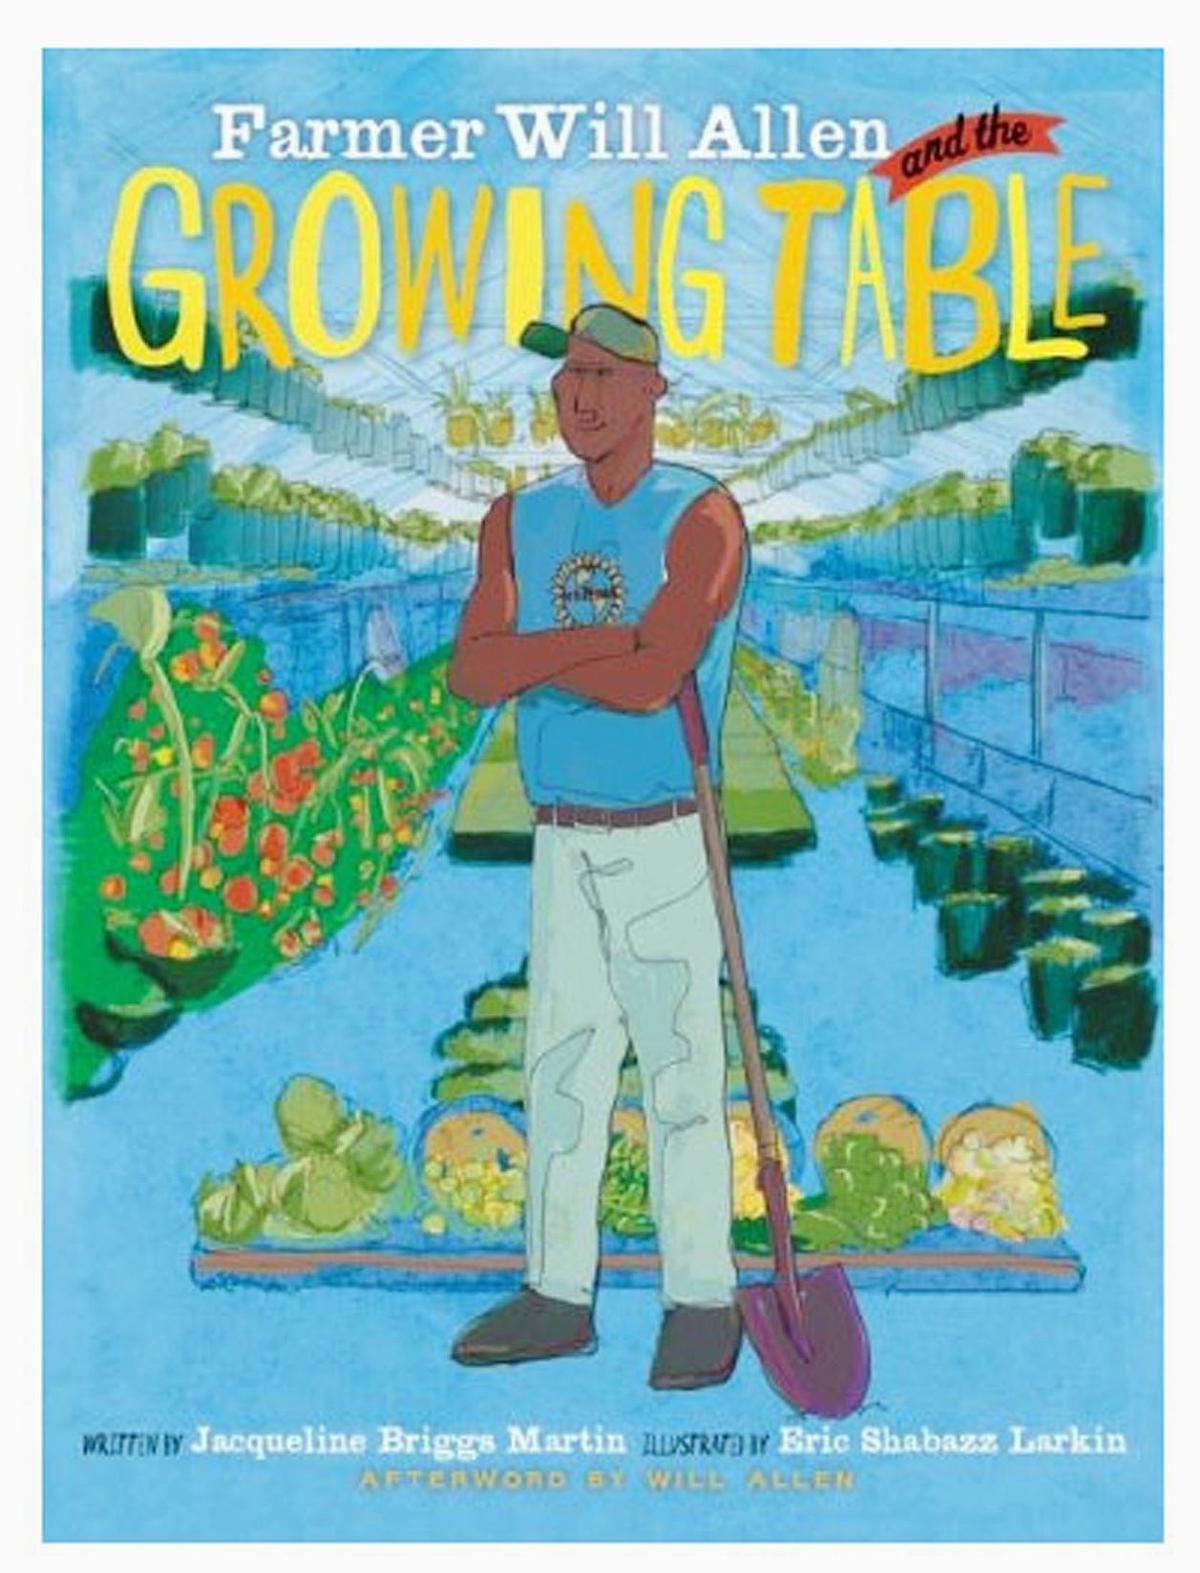 reading-initative-brings-farmer-will-allen-and-the-growing-table-to-local-fourth-graders